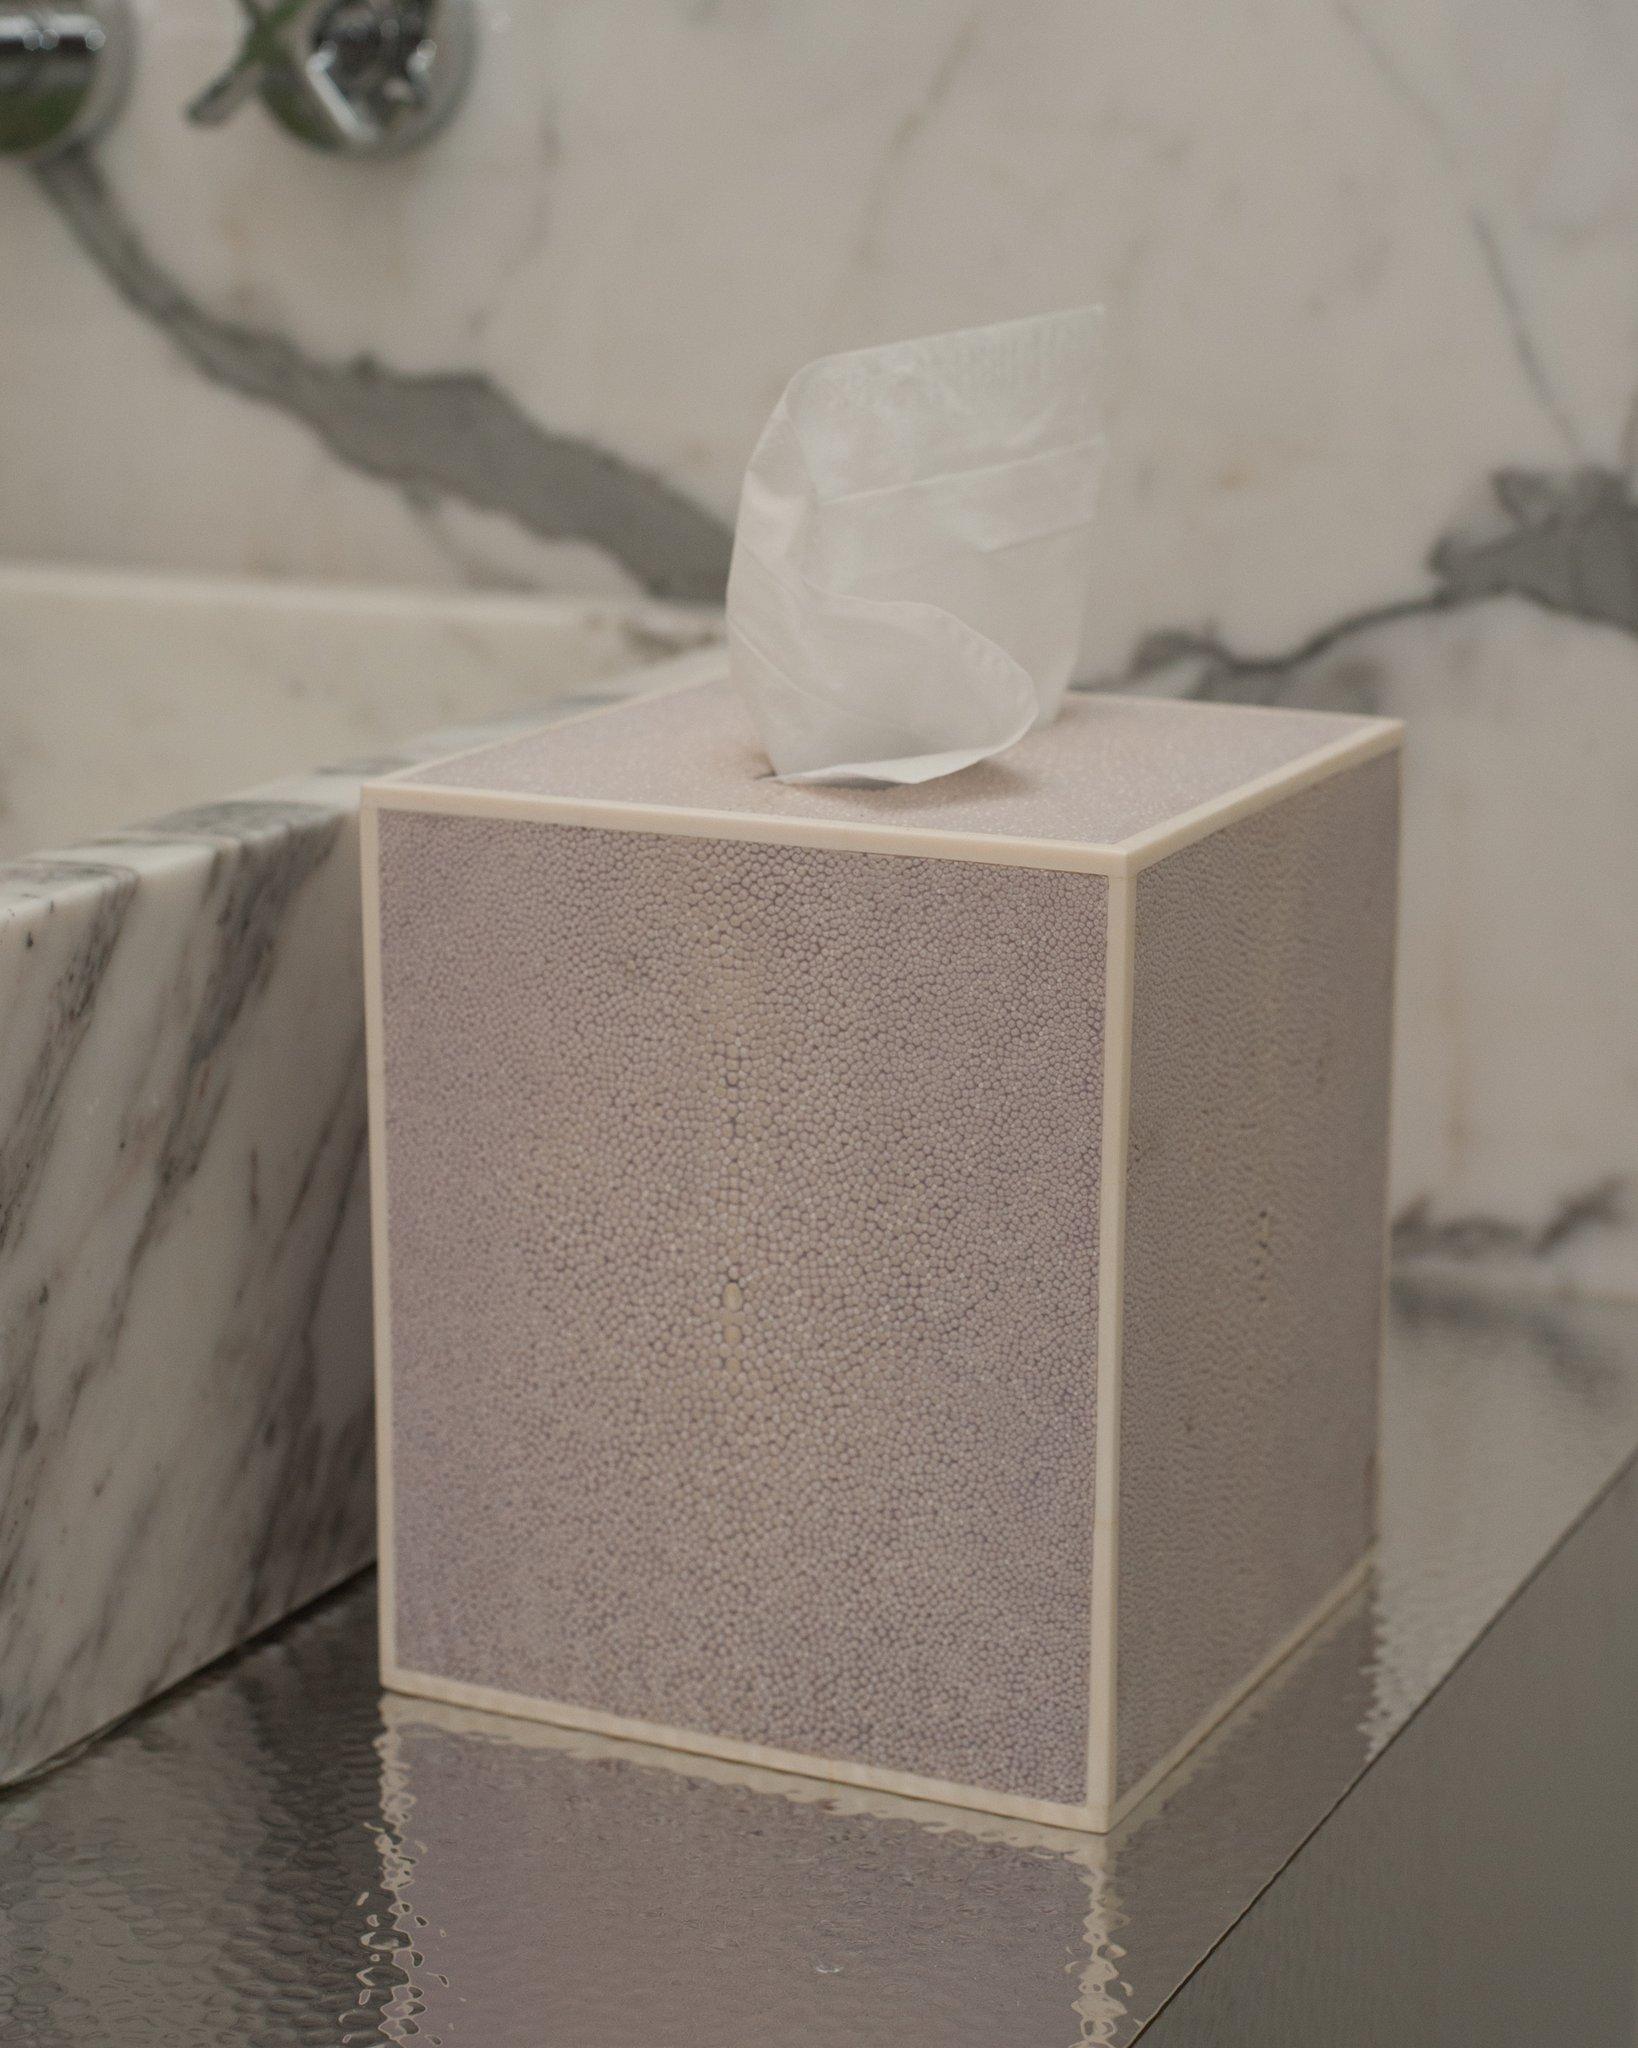 Your powder room may be small, but that doesn't make it and less deserving of extravagant ornamentation. This pale periwinkle lavender Shagreen tissue box cover is nothing short of exceptional, fully wrapped in Shagreen and bone on a base of